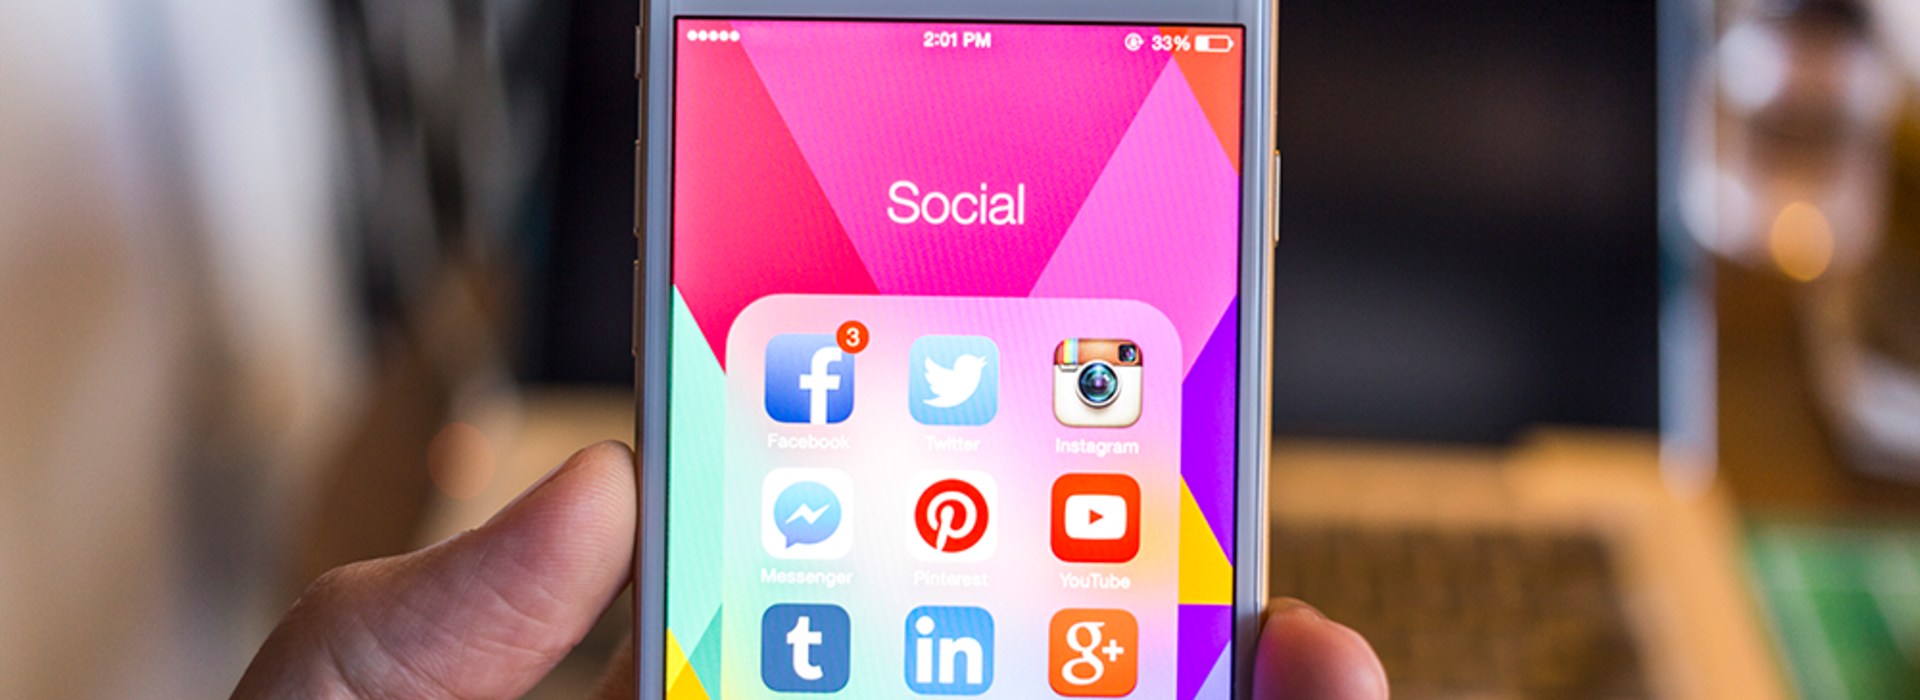 A hand holding a phone with social icons on the screen.